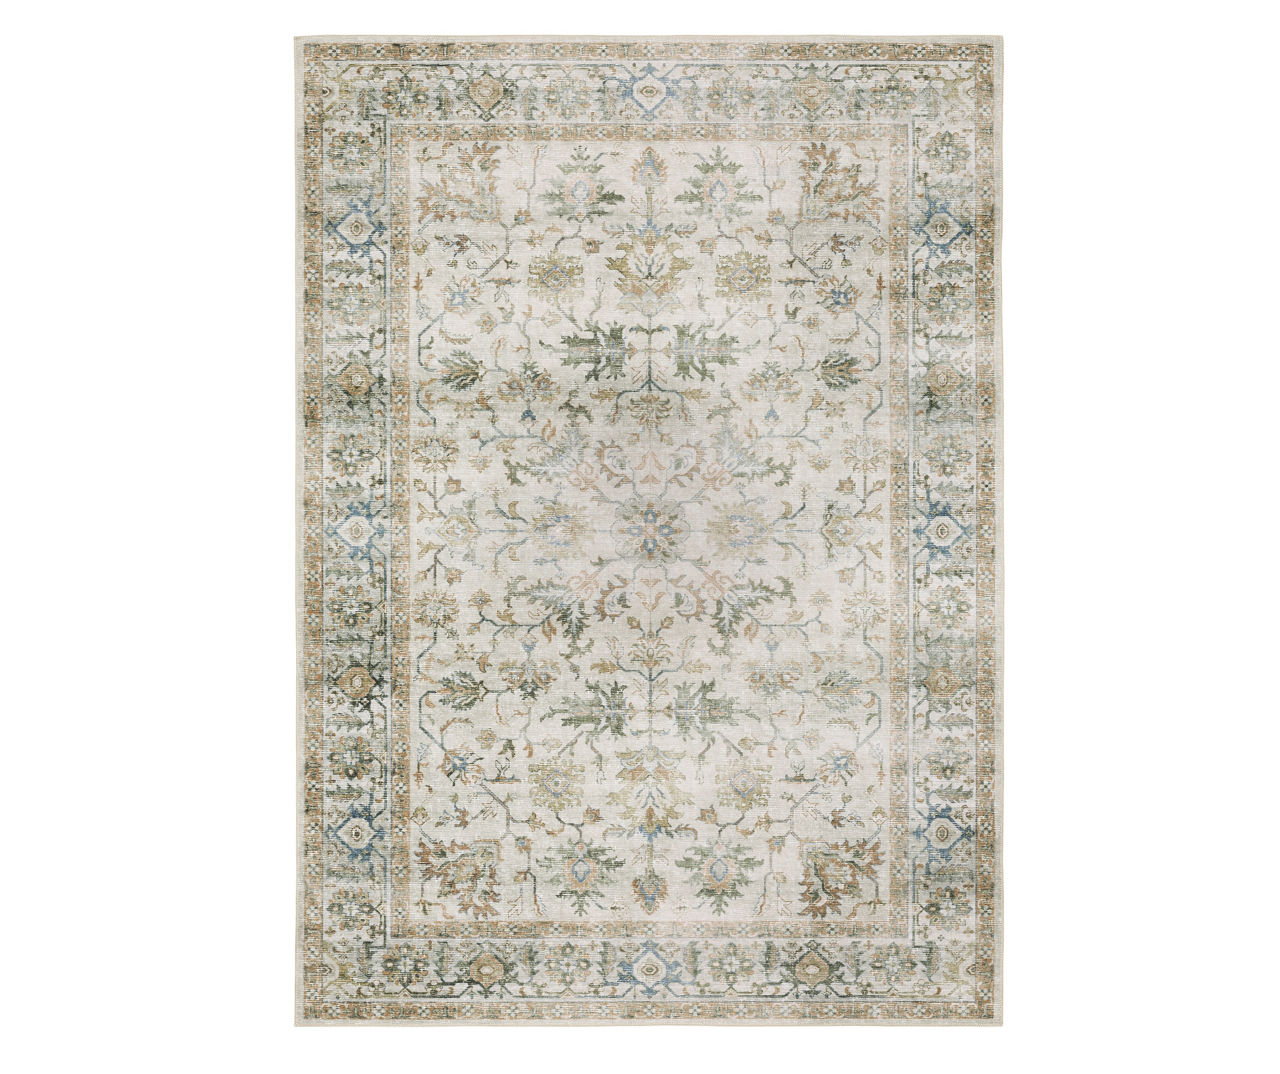 Chalkley Ivory & Green Floral Area Rug, (2' x 3')